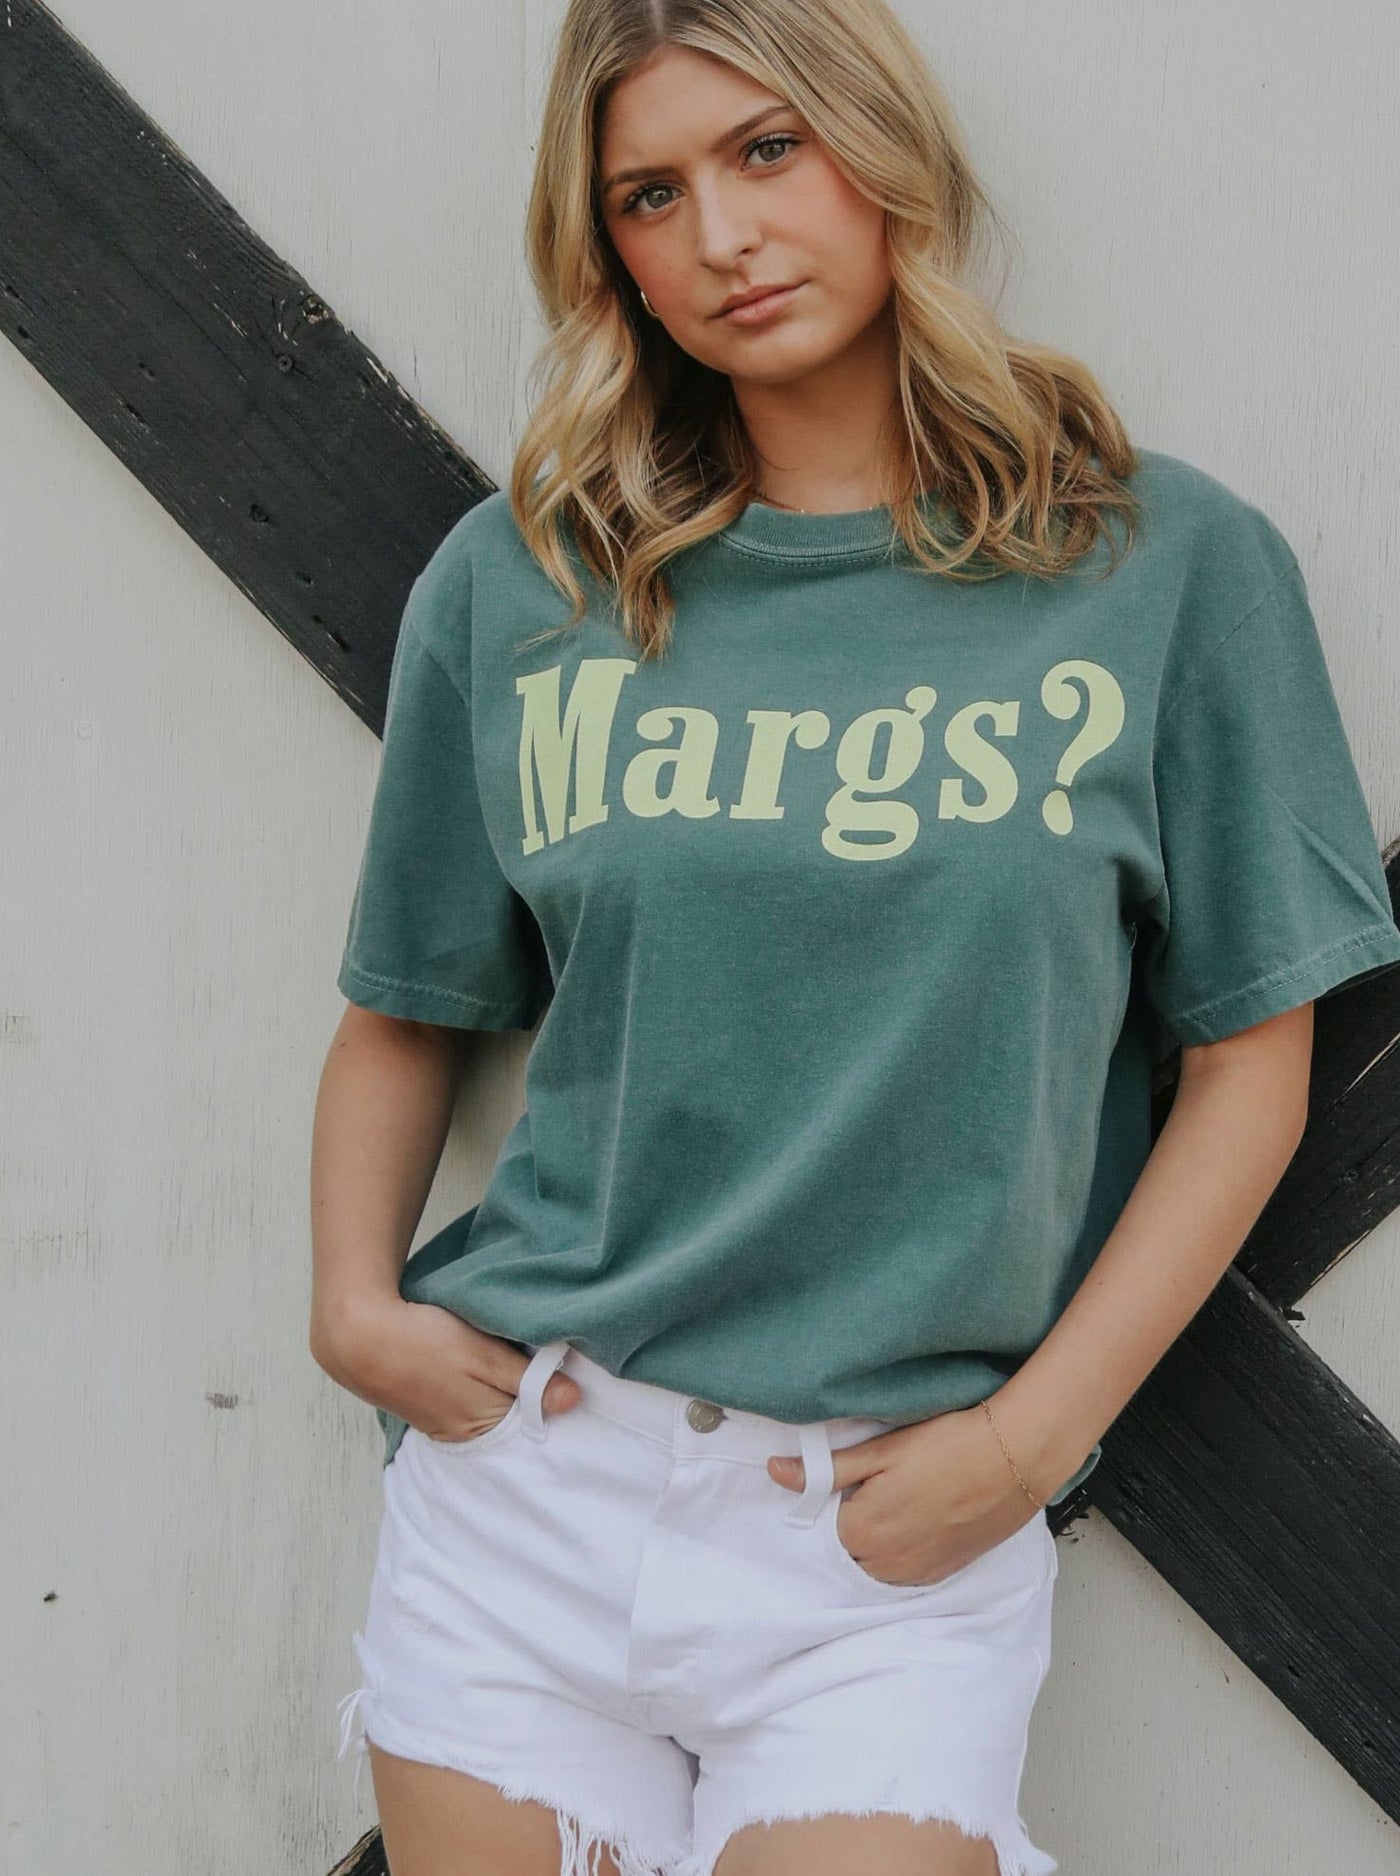 Margs? Graphic T-shirt